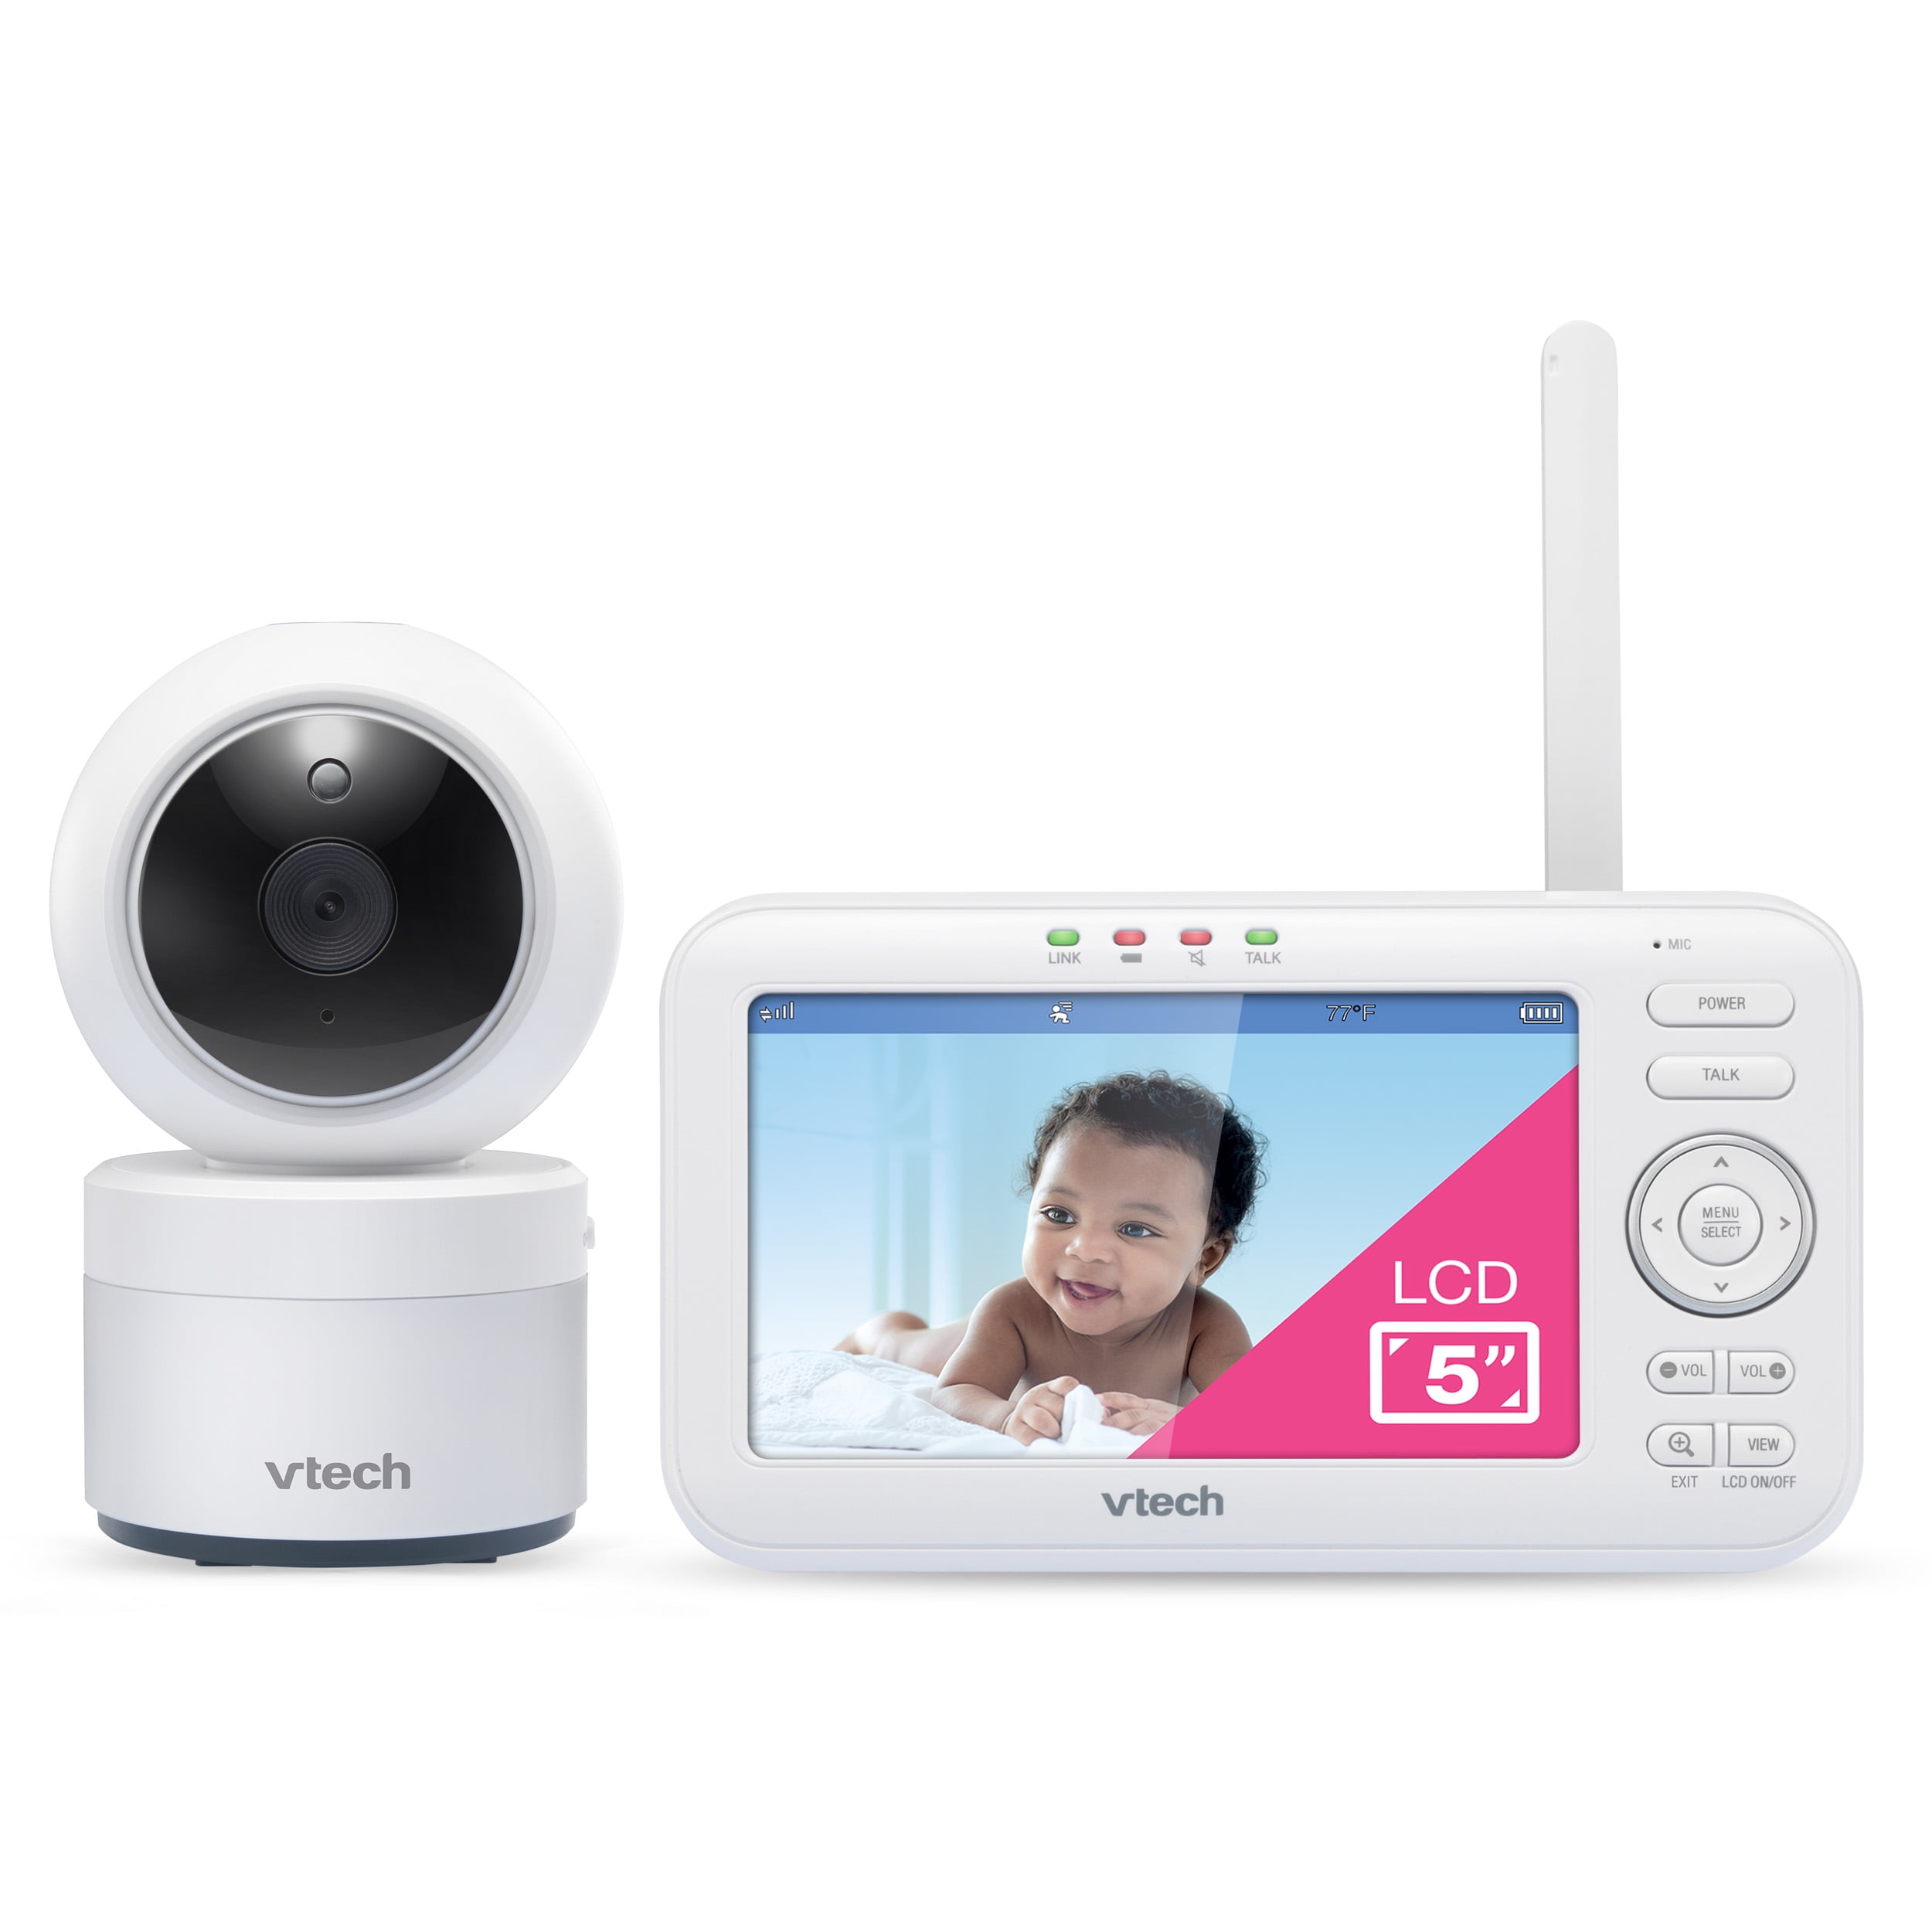 Vtech Vm5263 5 Digitial Video Baby Monitor With Pan And Tilt And Night Light Walmart Com